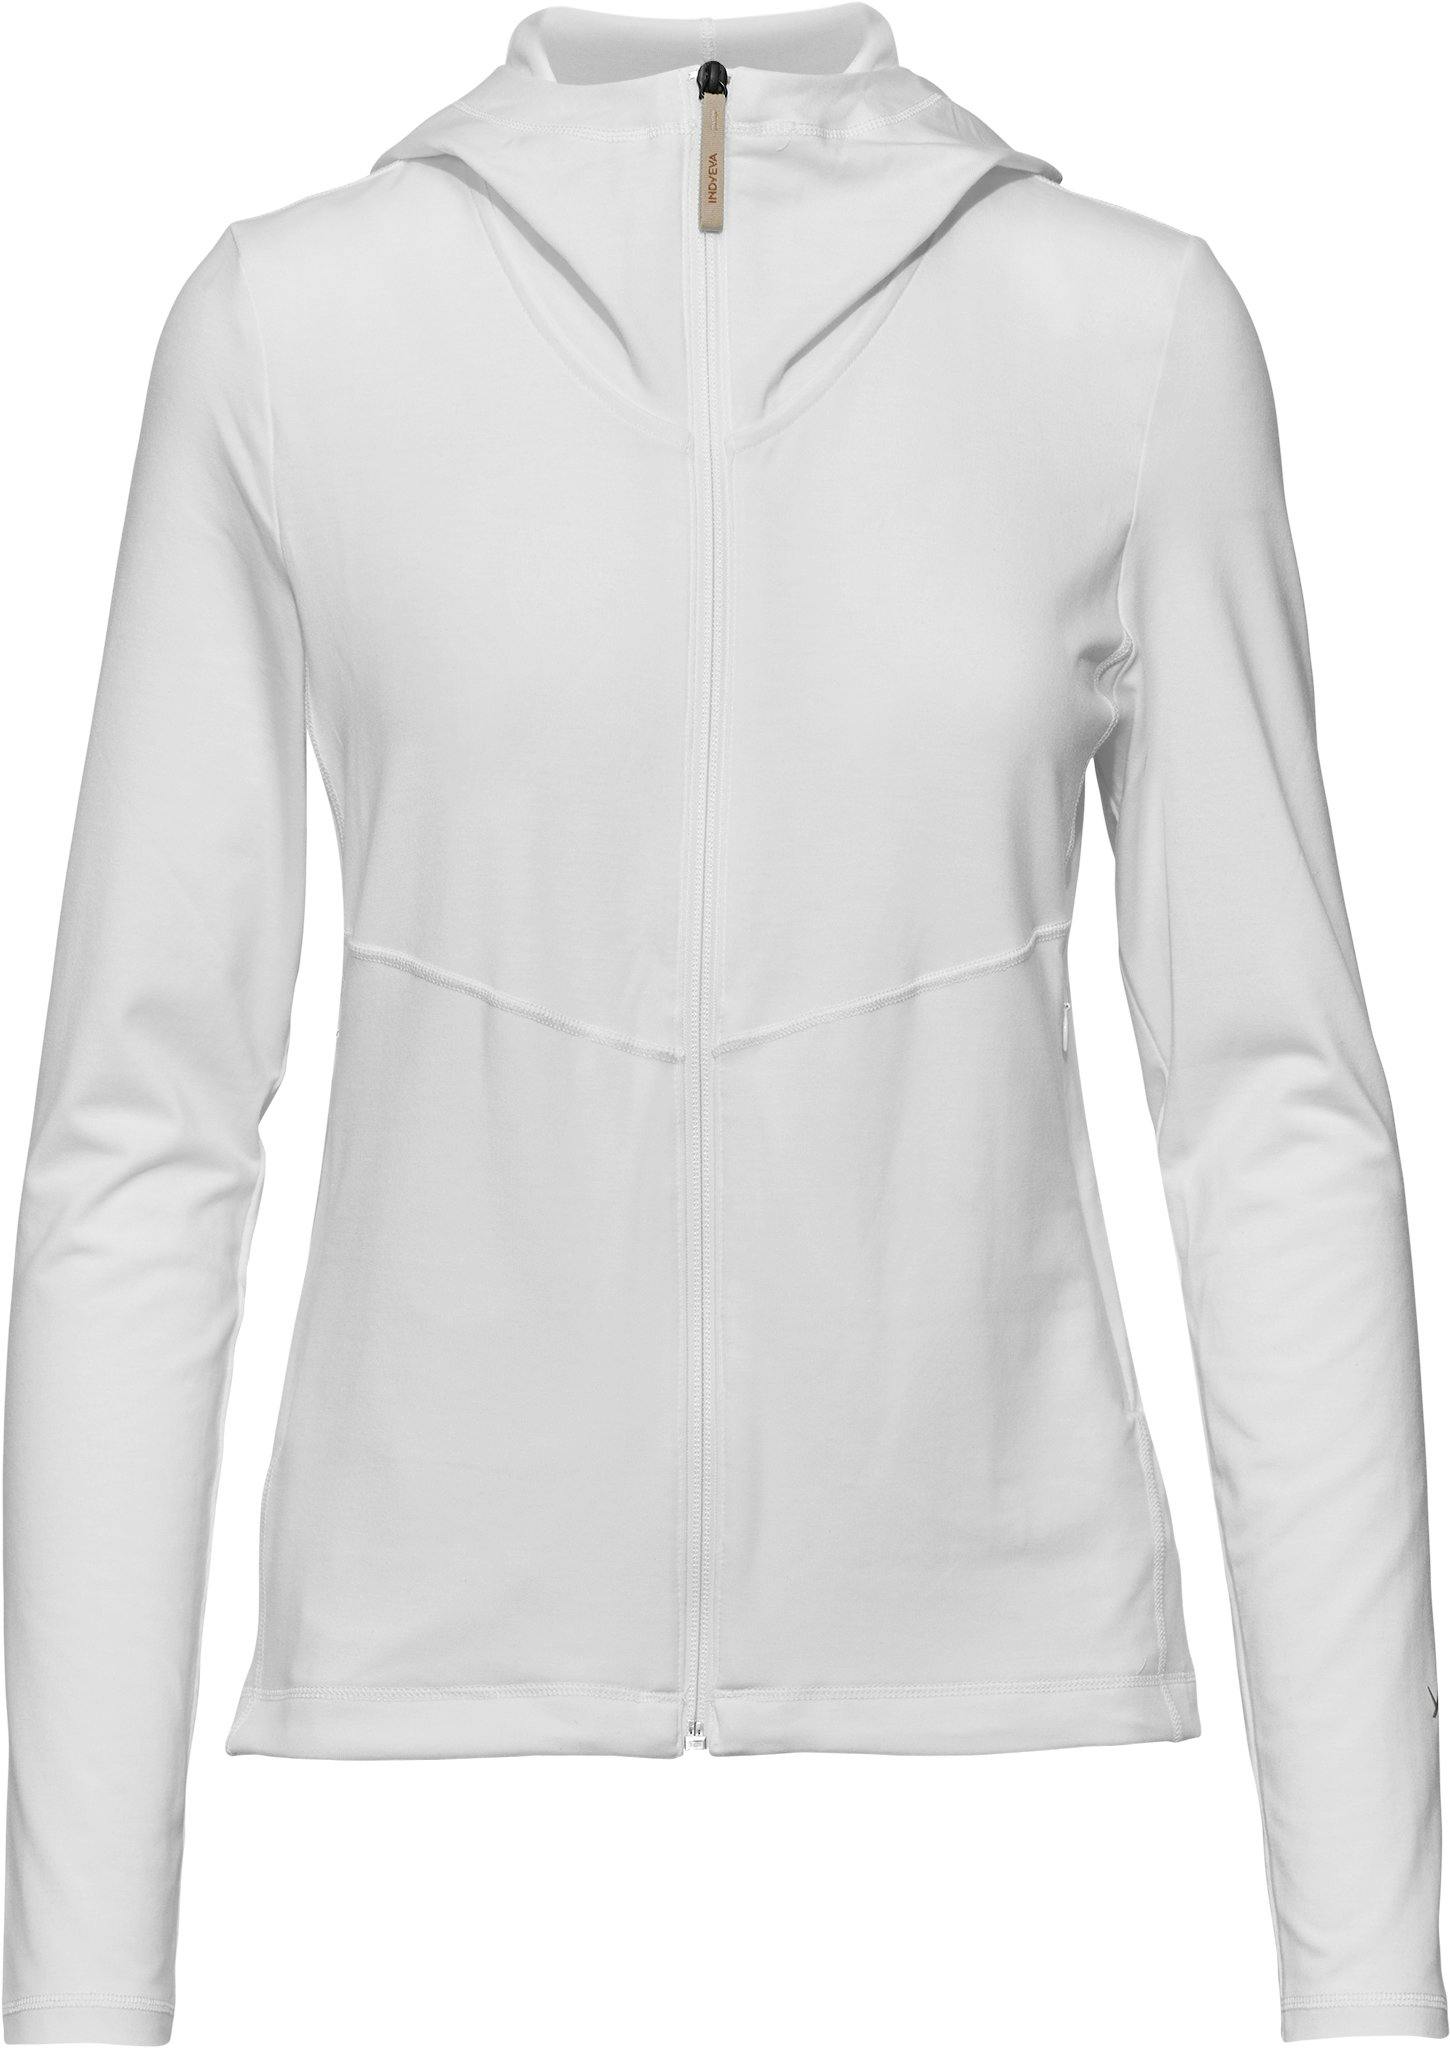 Product image for Secco Long Sleeve Hooded Zip Up Jacket - Women's